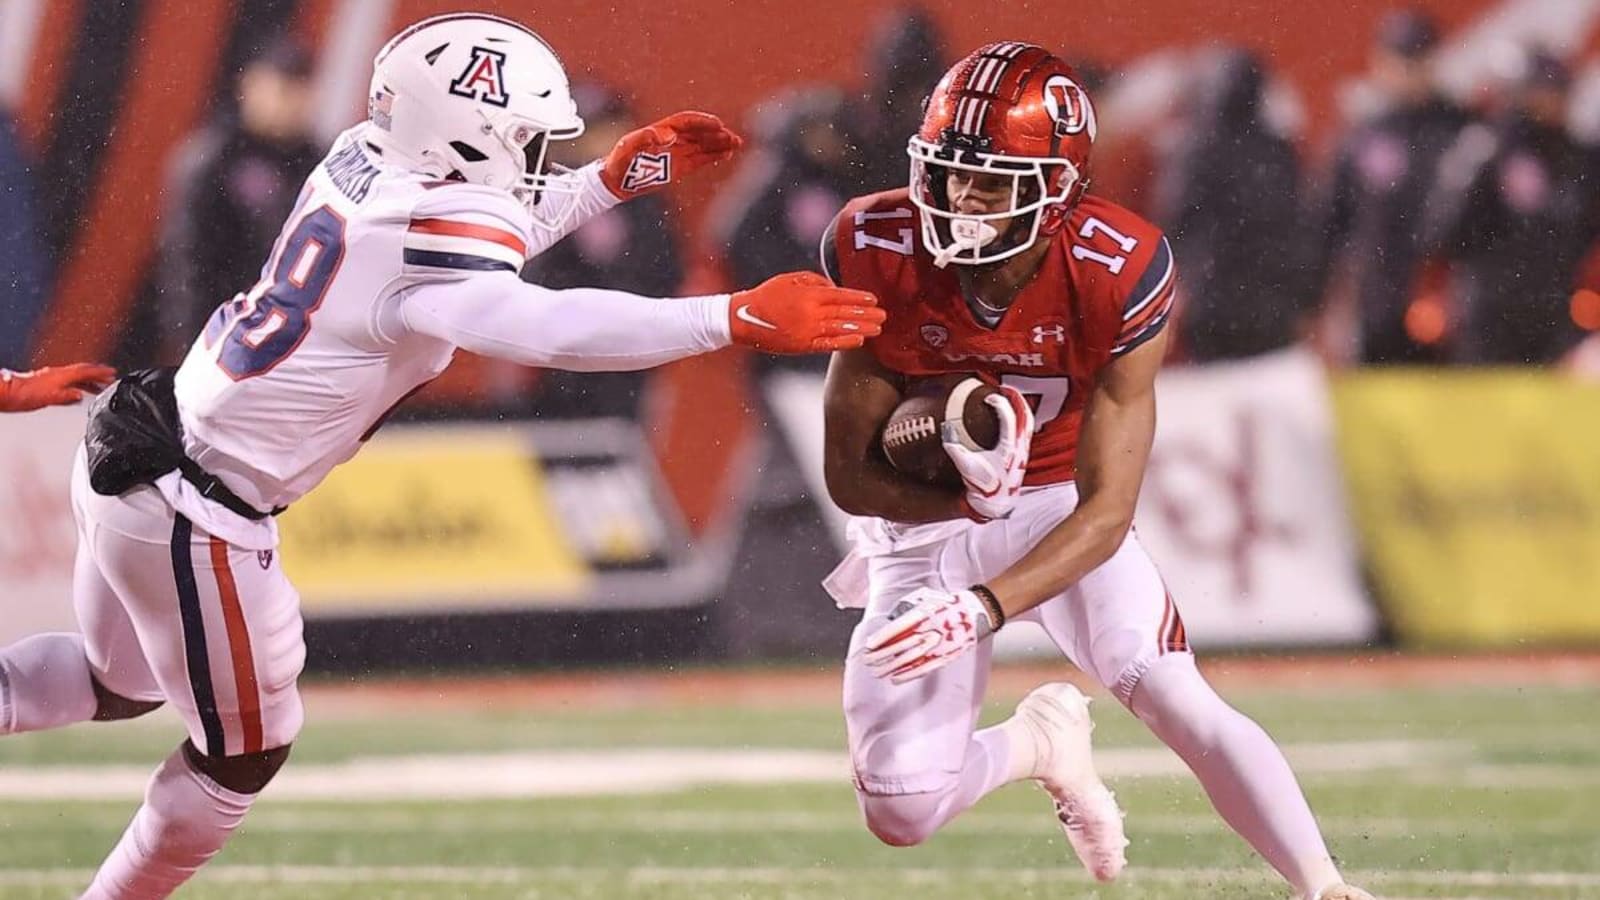 Devaughn Vele with crucial catch for Utes against Stanford